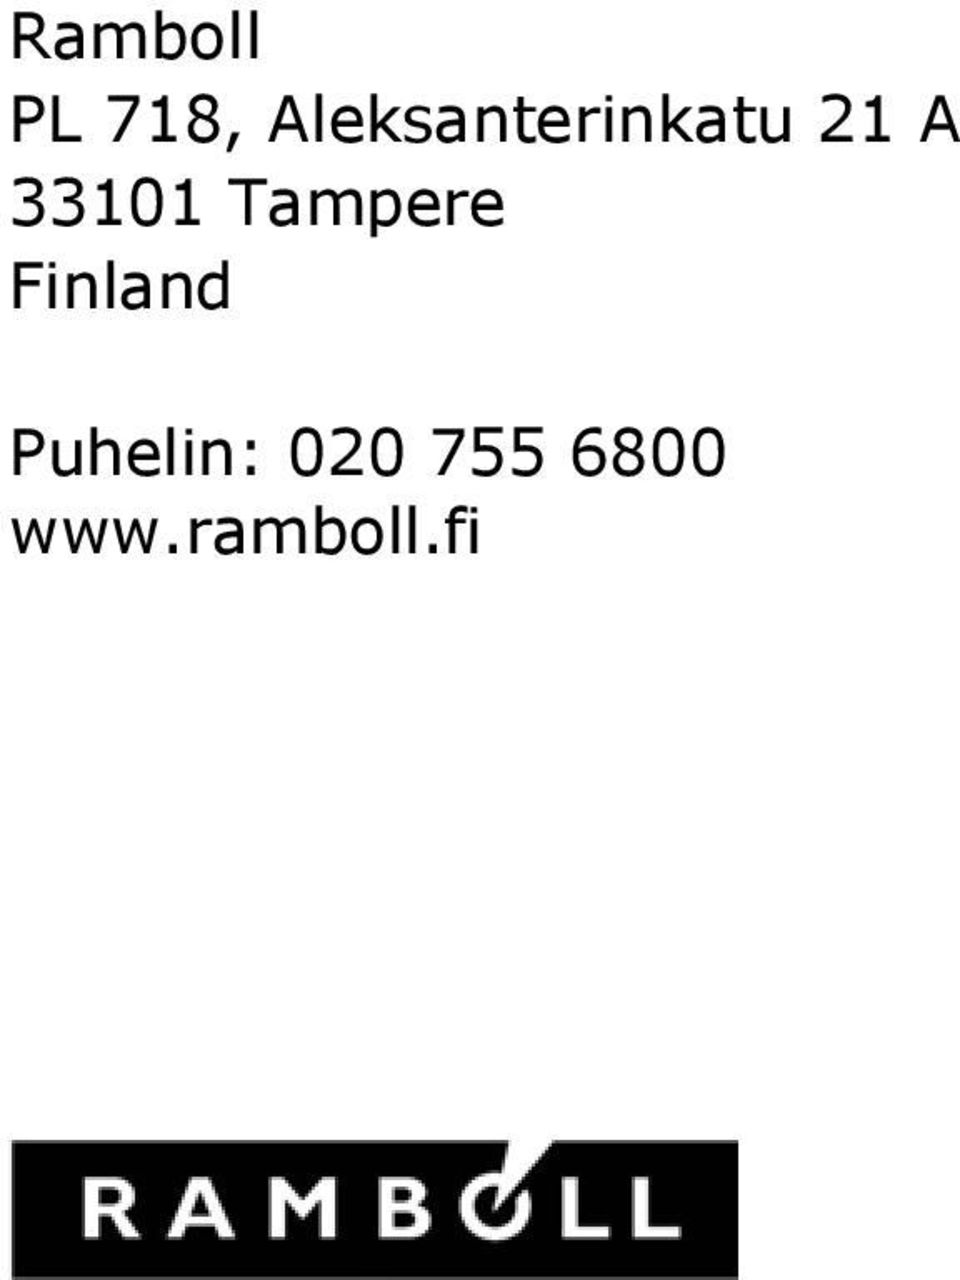 33101 Tampere Finland